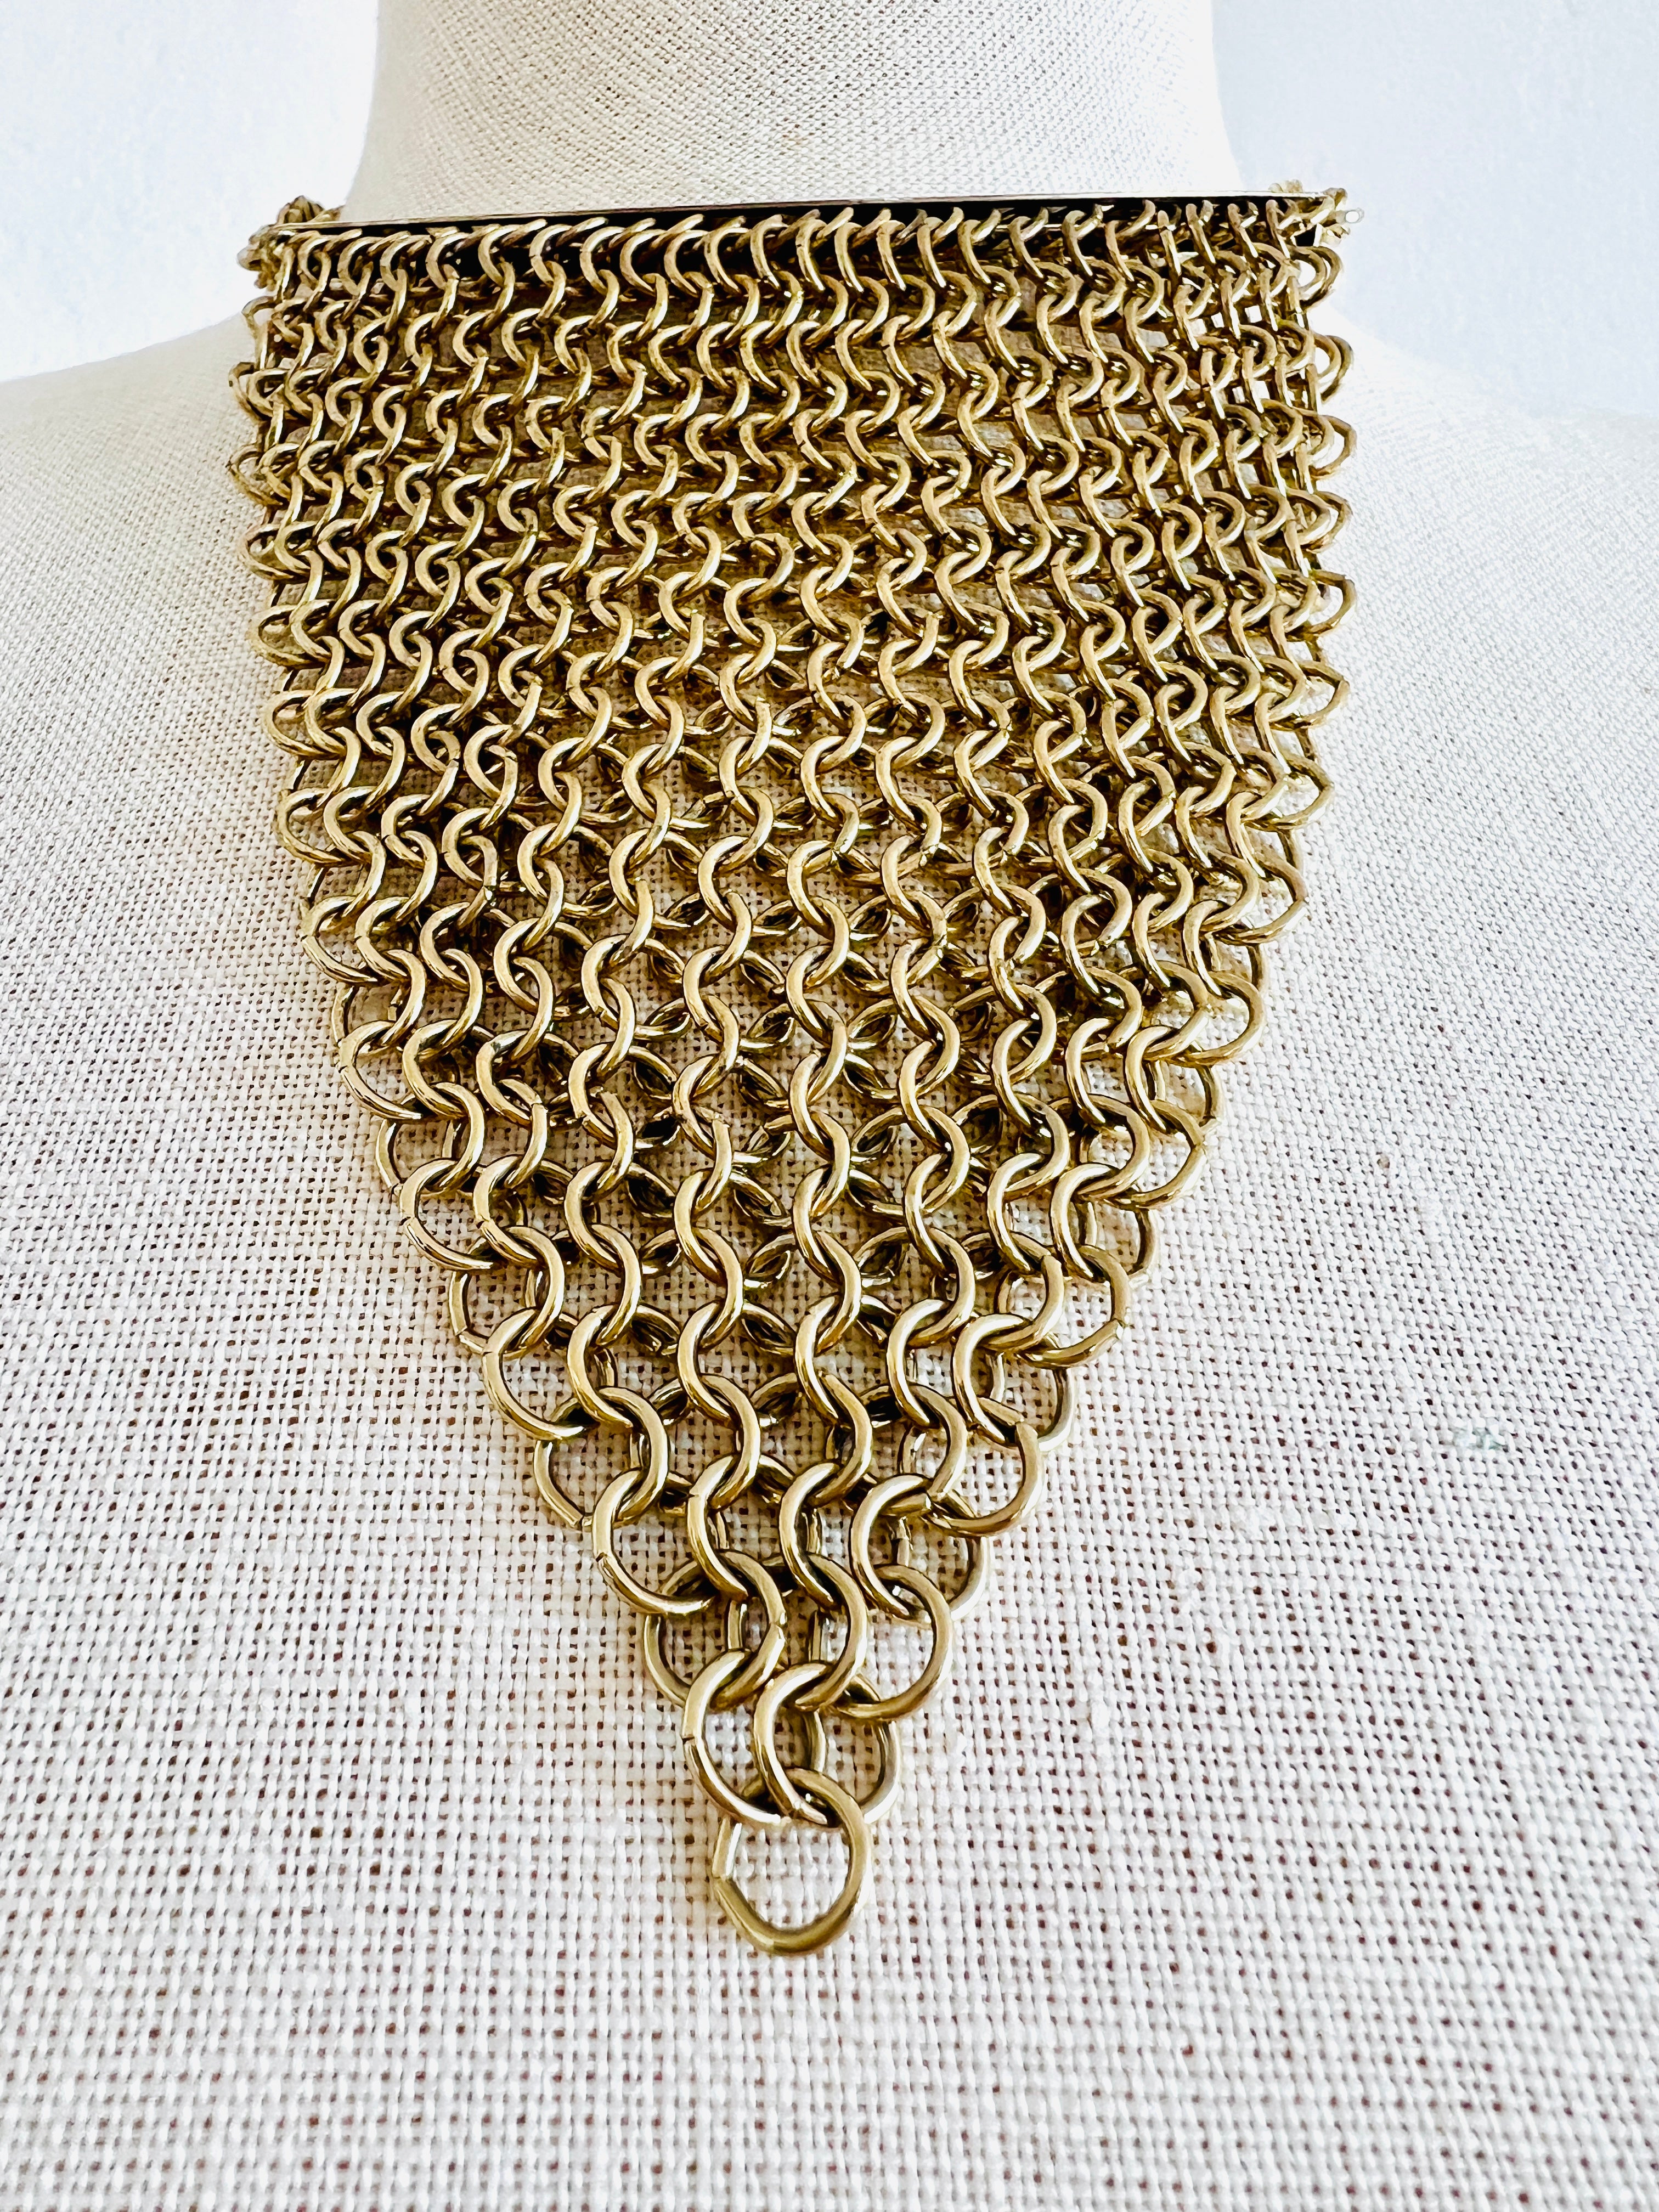 Rare Whiting & Davis gold mesh adjustable choker necklace.

Size: The necklace is adjustable. It is 20